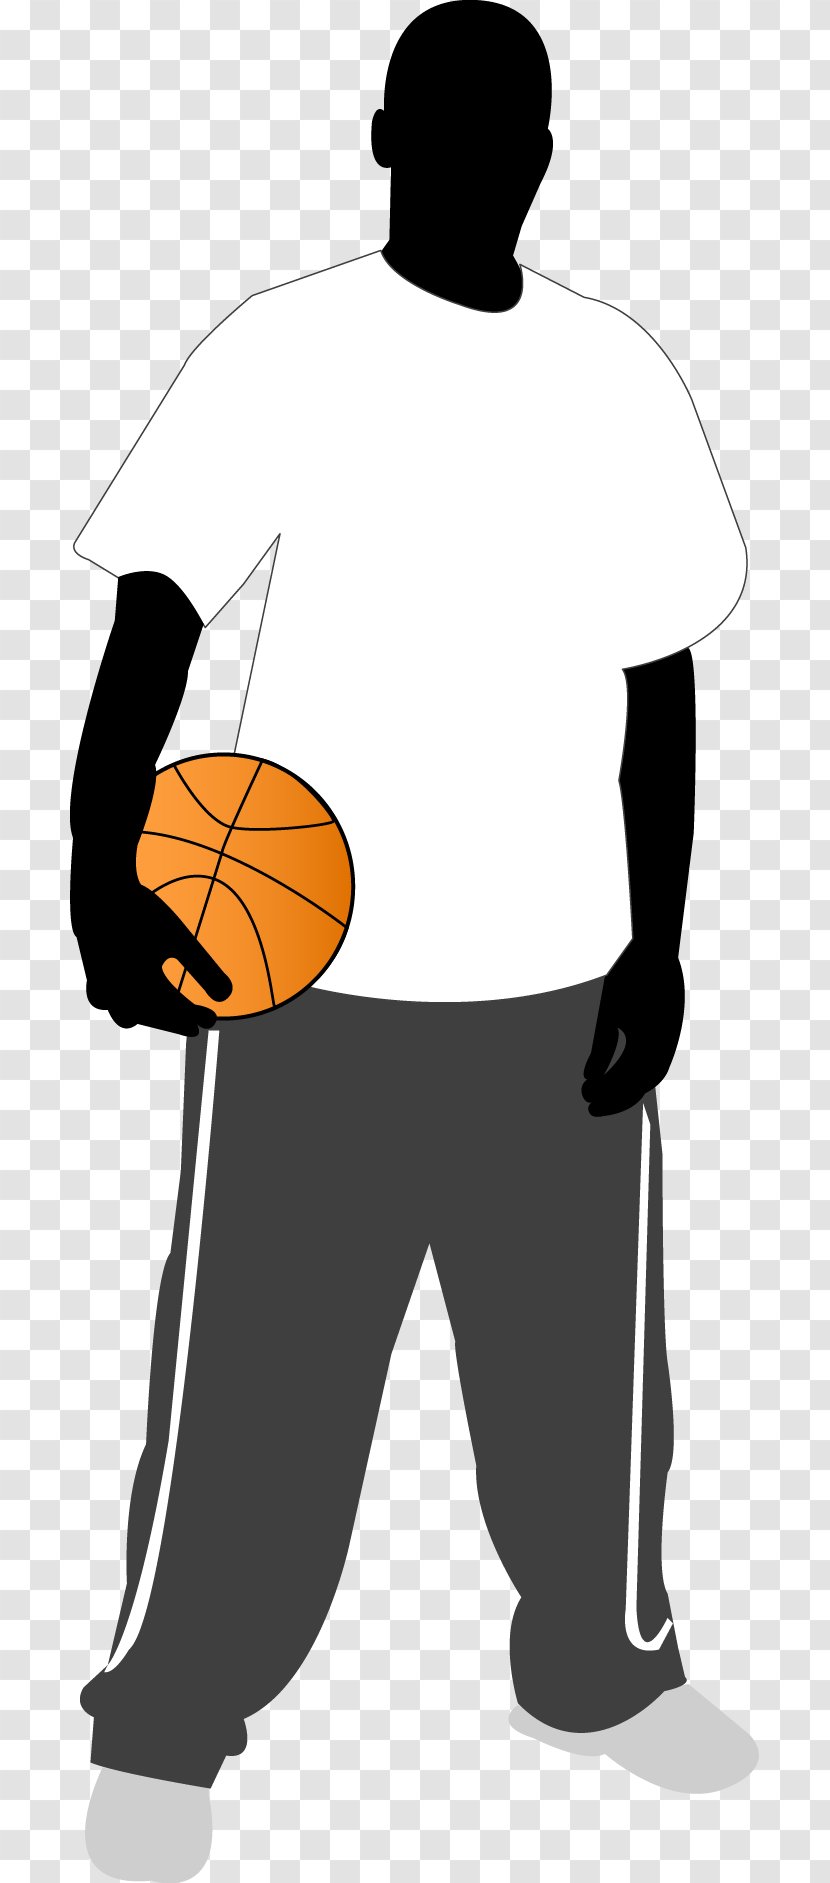 Basketball - Standing - The Man With Transparent PNG